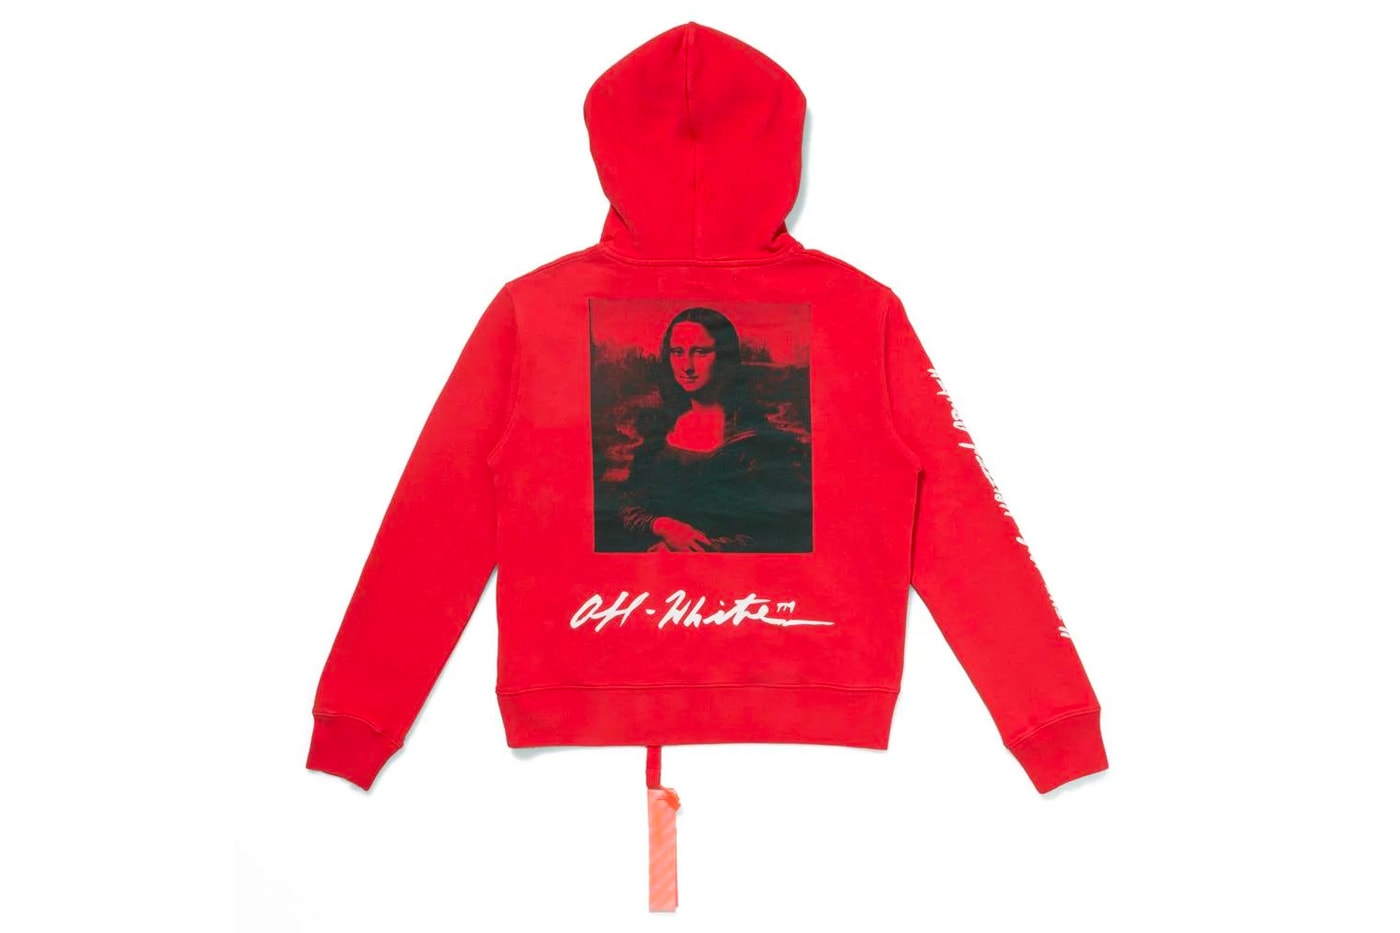 MCA Chicago Drops More Virgil Abloh Exhibition Apparel hoodie bernini caravaggio off white mona lisa socks industrial belt t-shirts drop date release info buy now anorak 